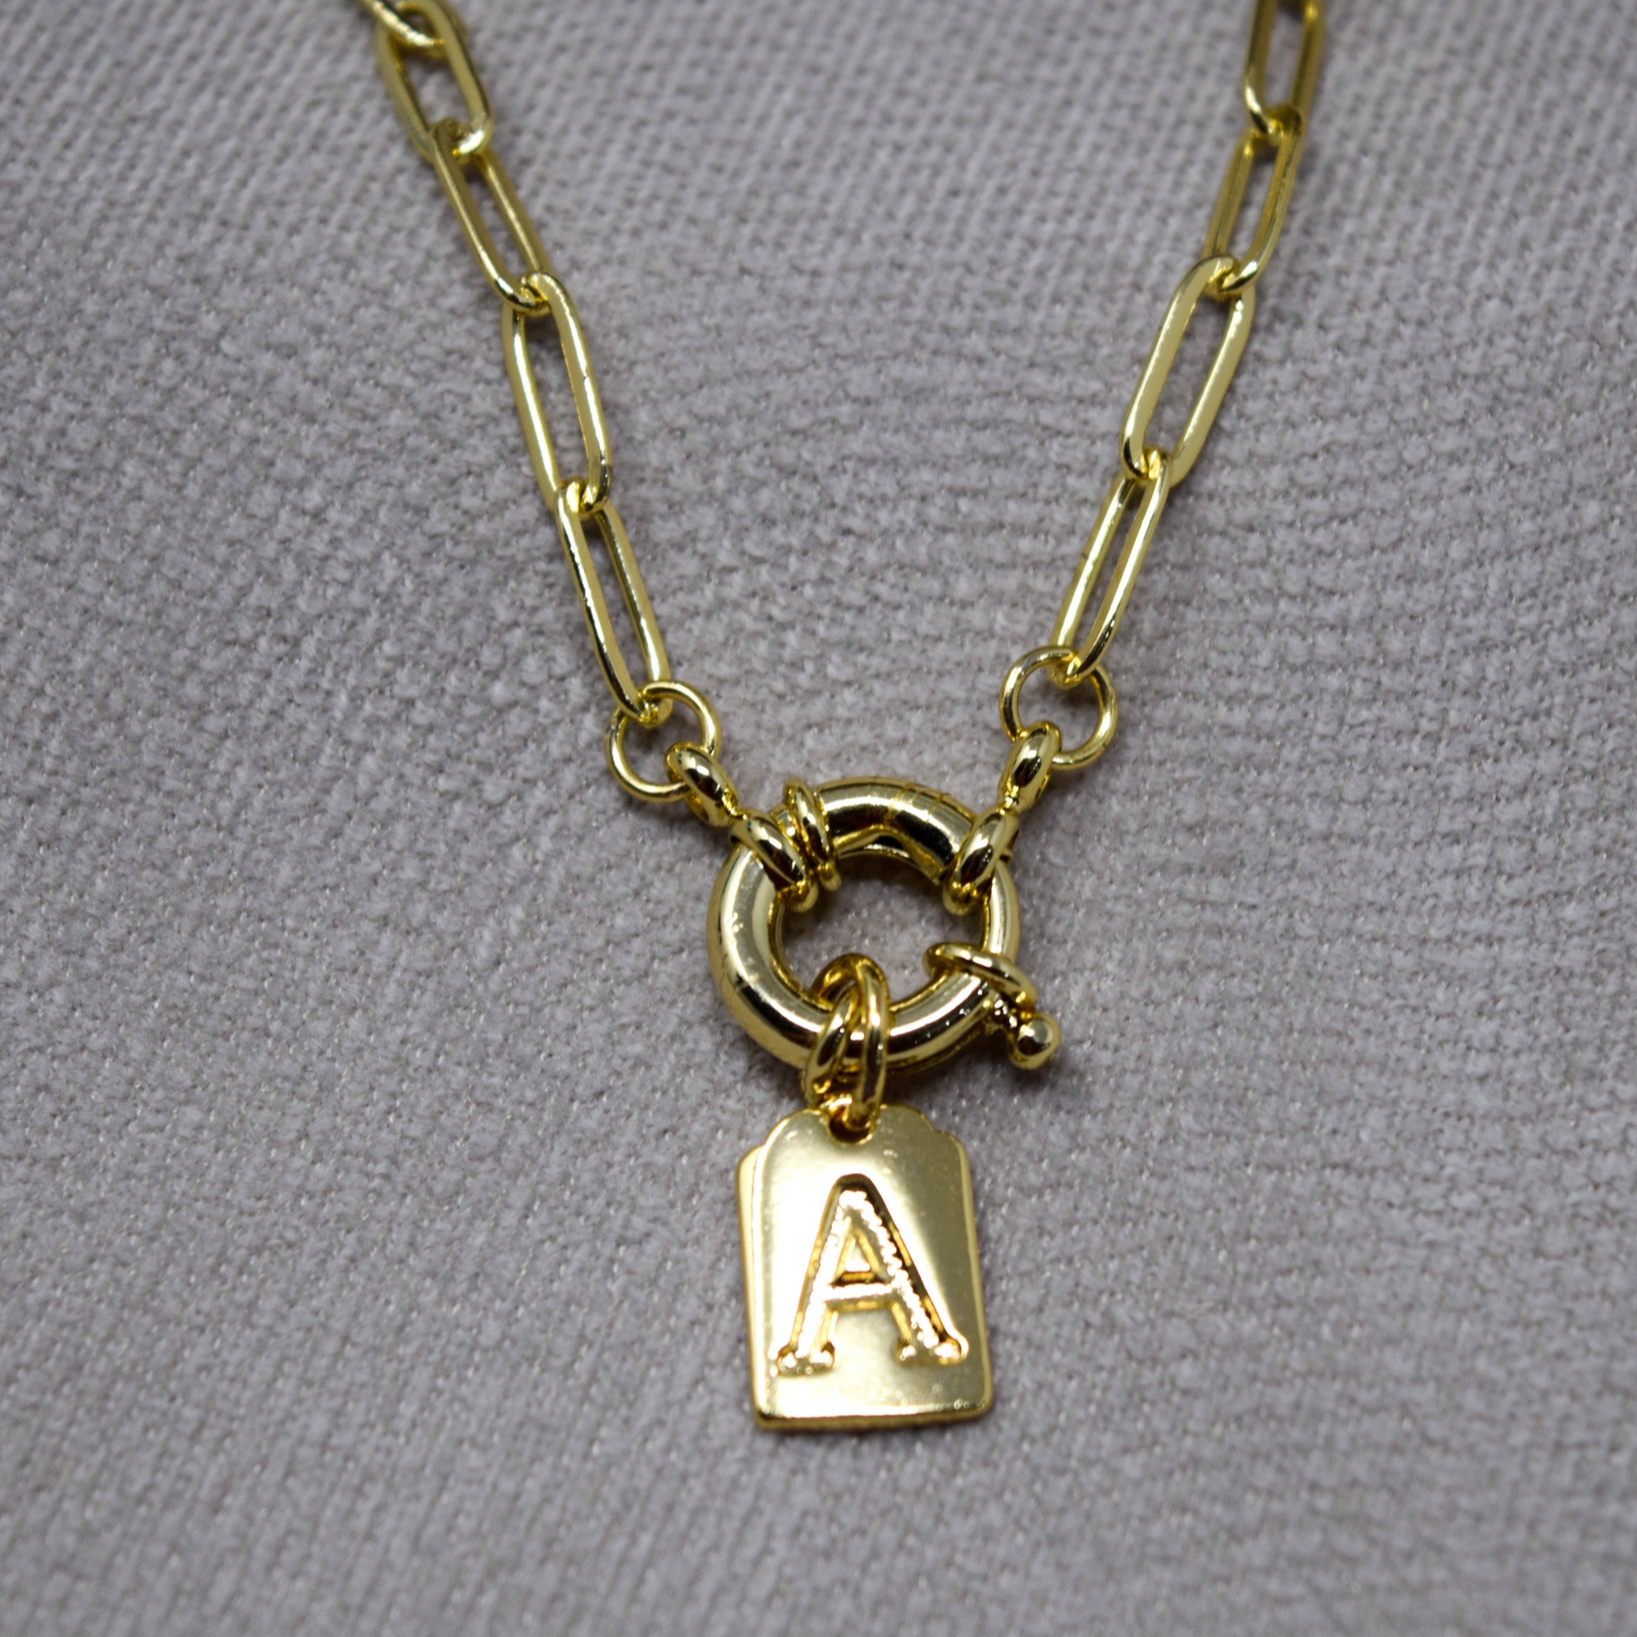 ABC TAG CHAIN NECKLACE